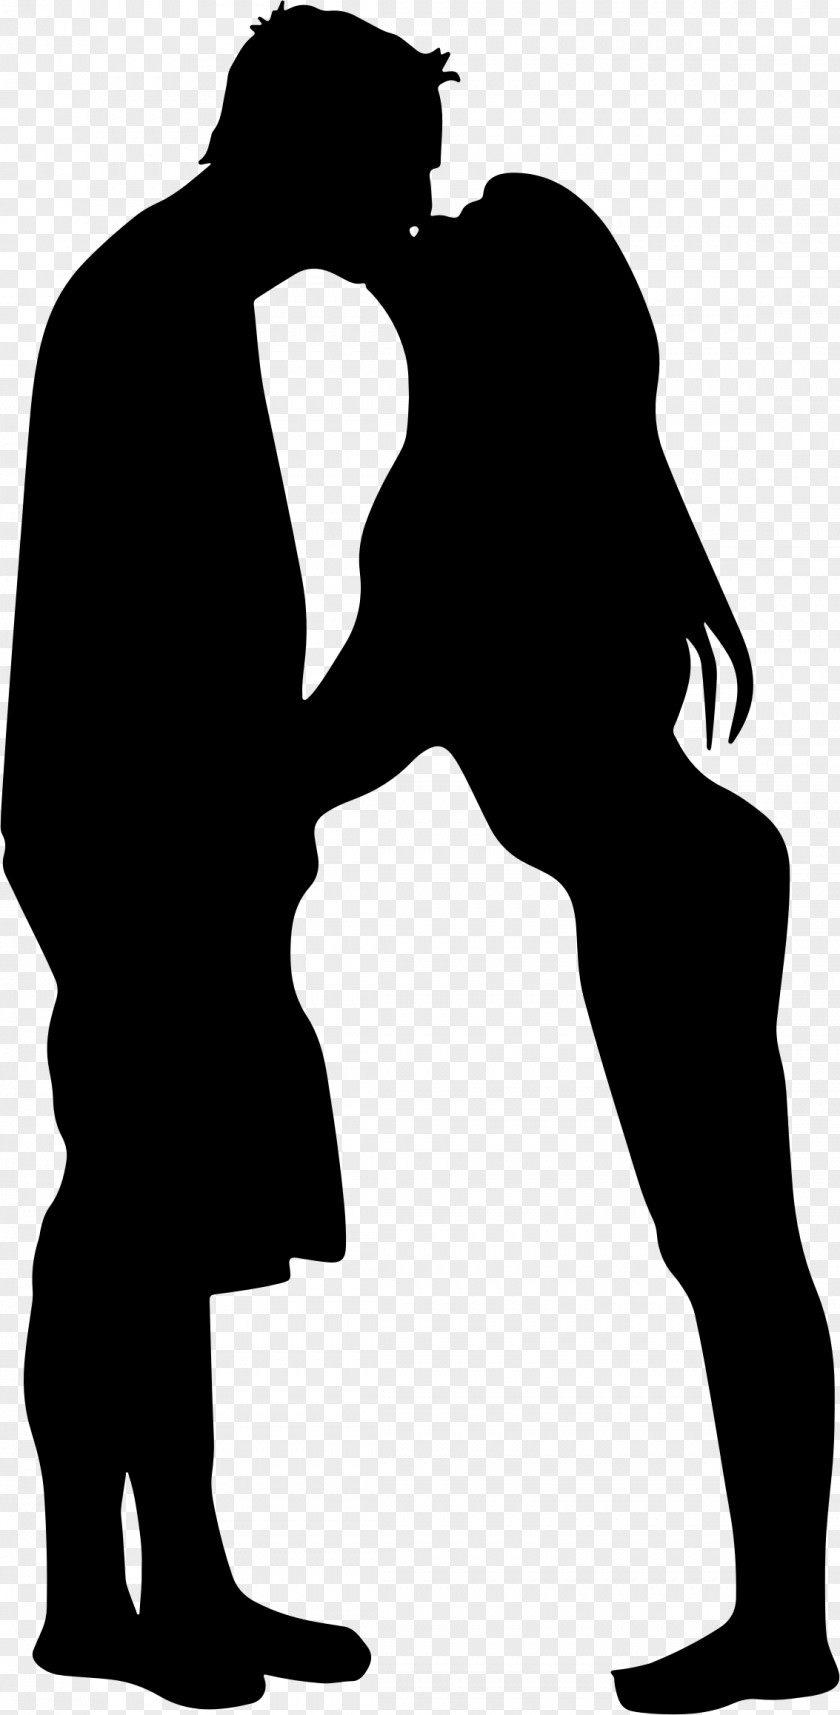 Couple Kiss Silhouette Intimate Relationship PNG